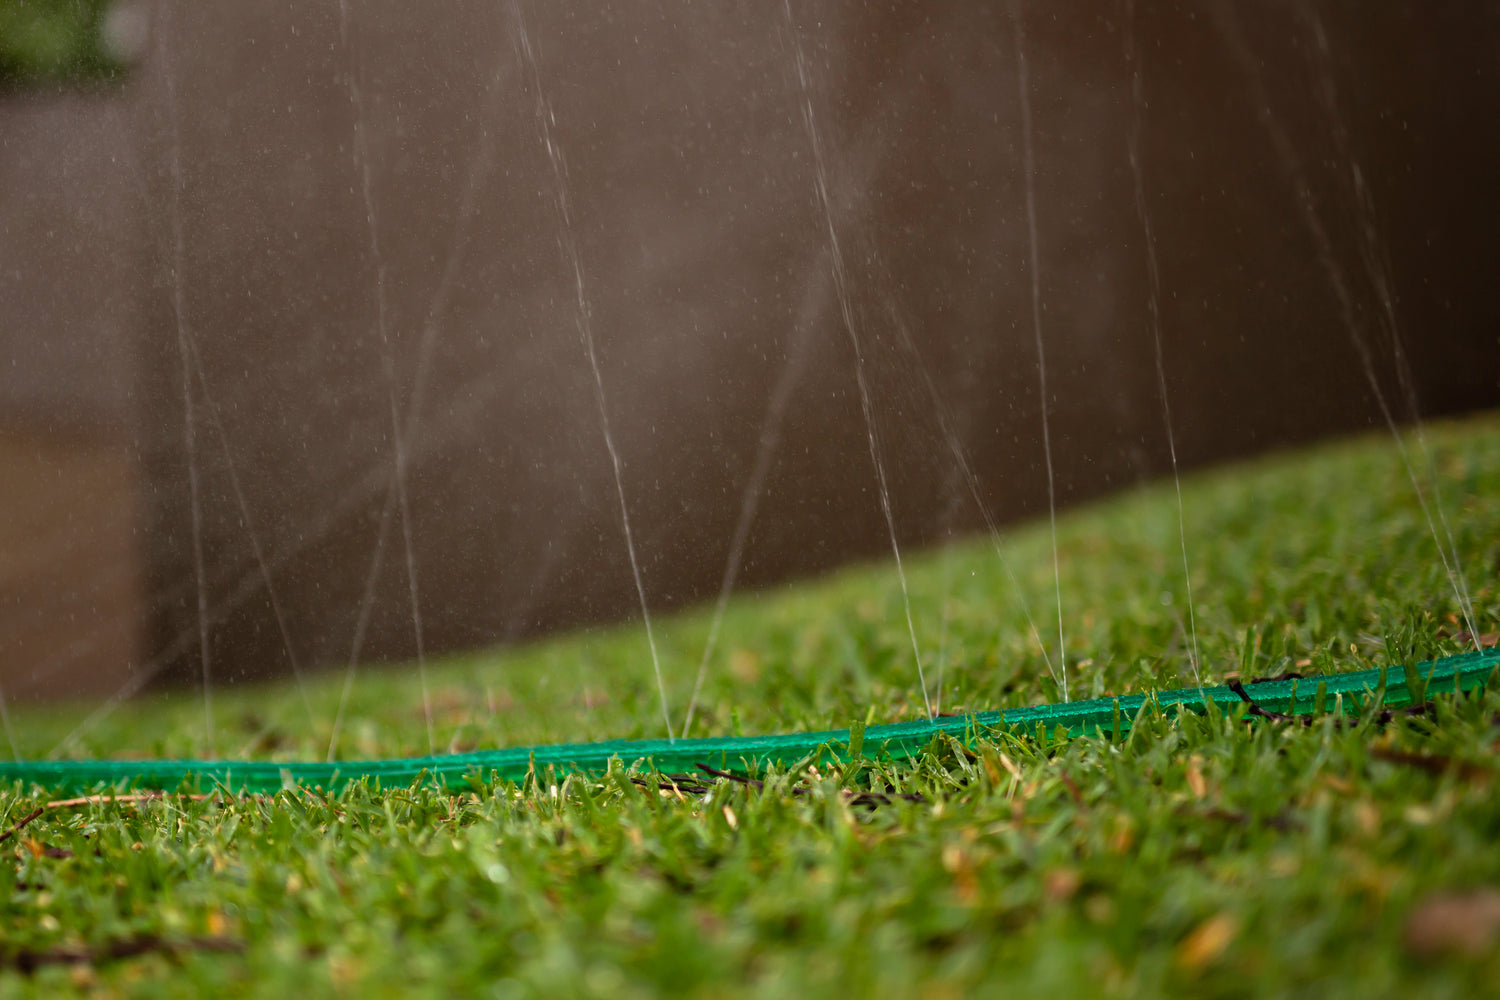 Hoselink soaker hose being used on a lawn